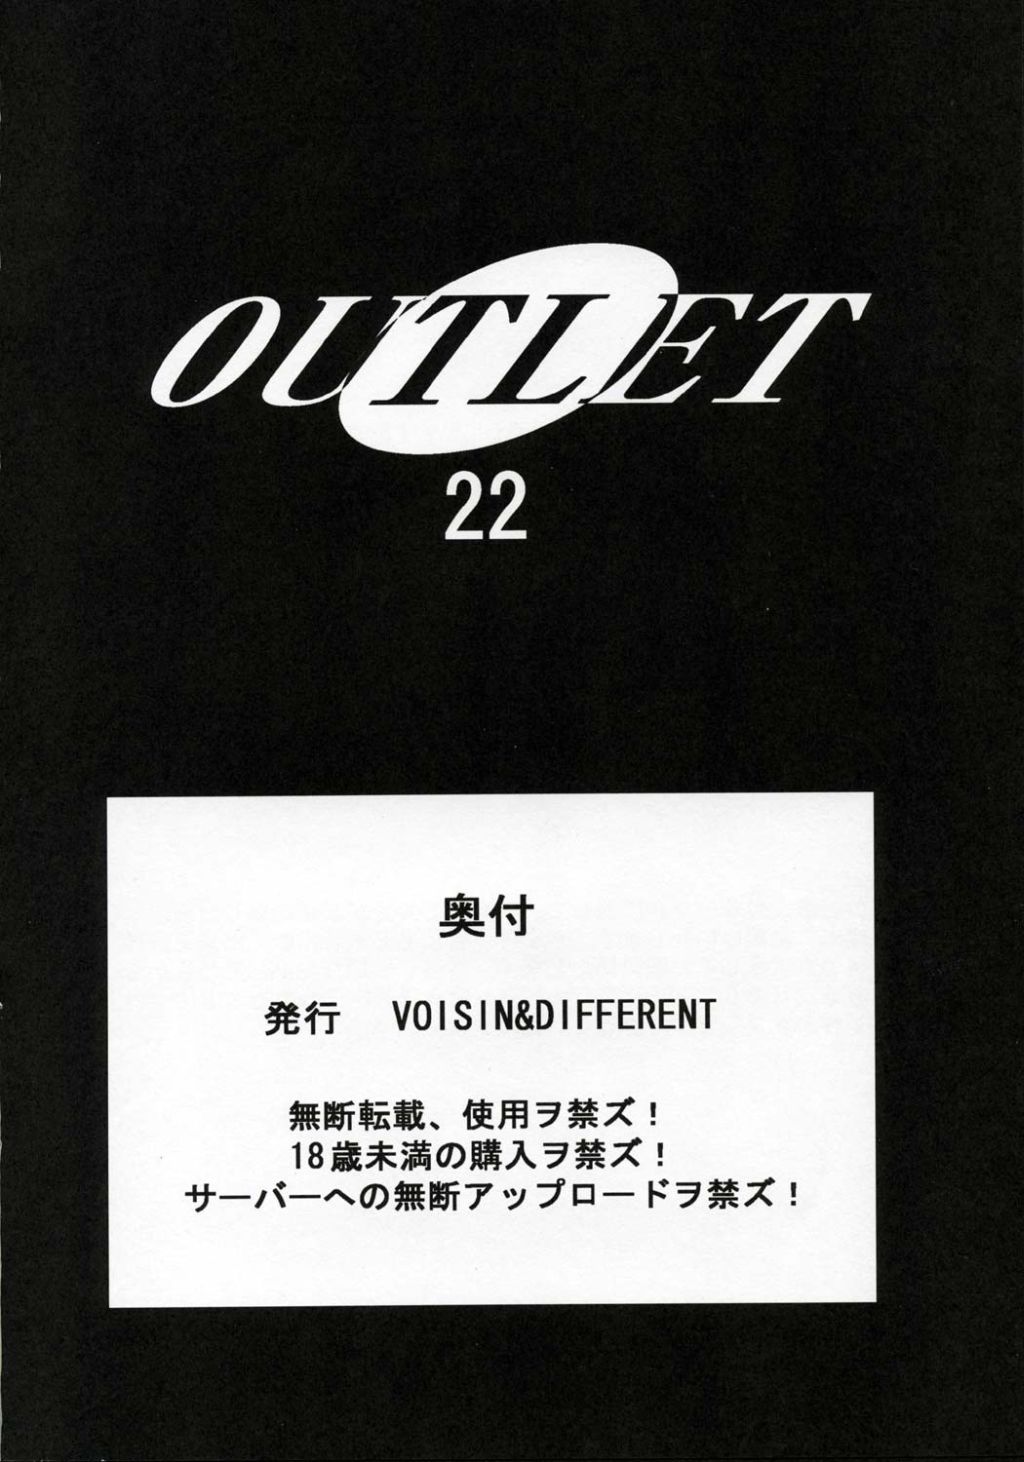 Outlet 22 